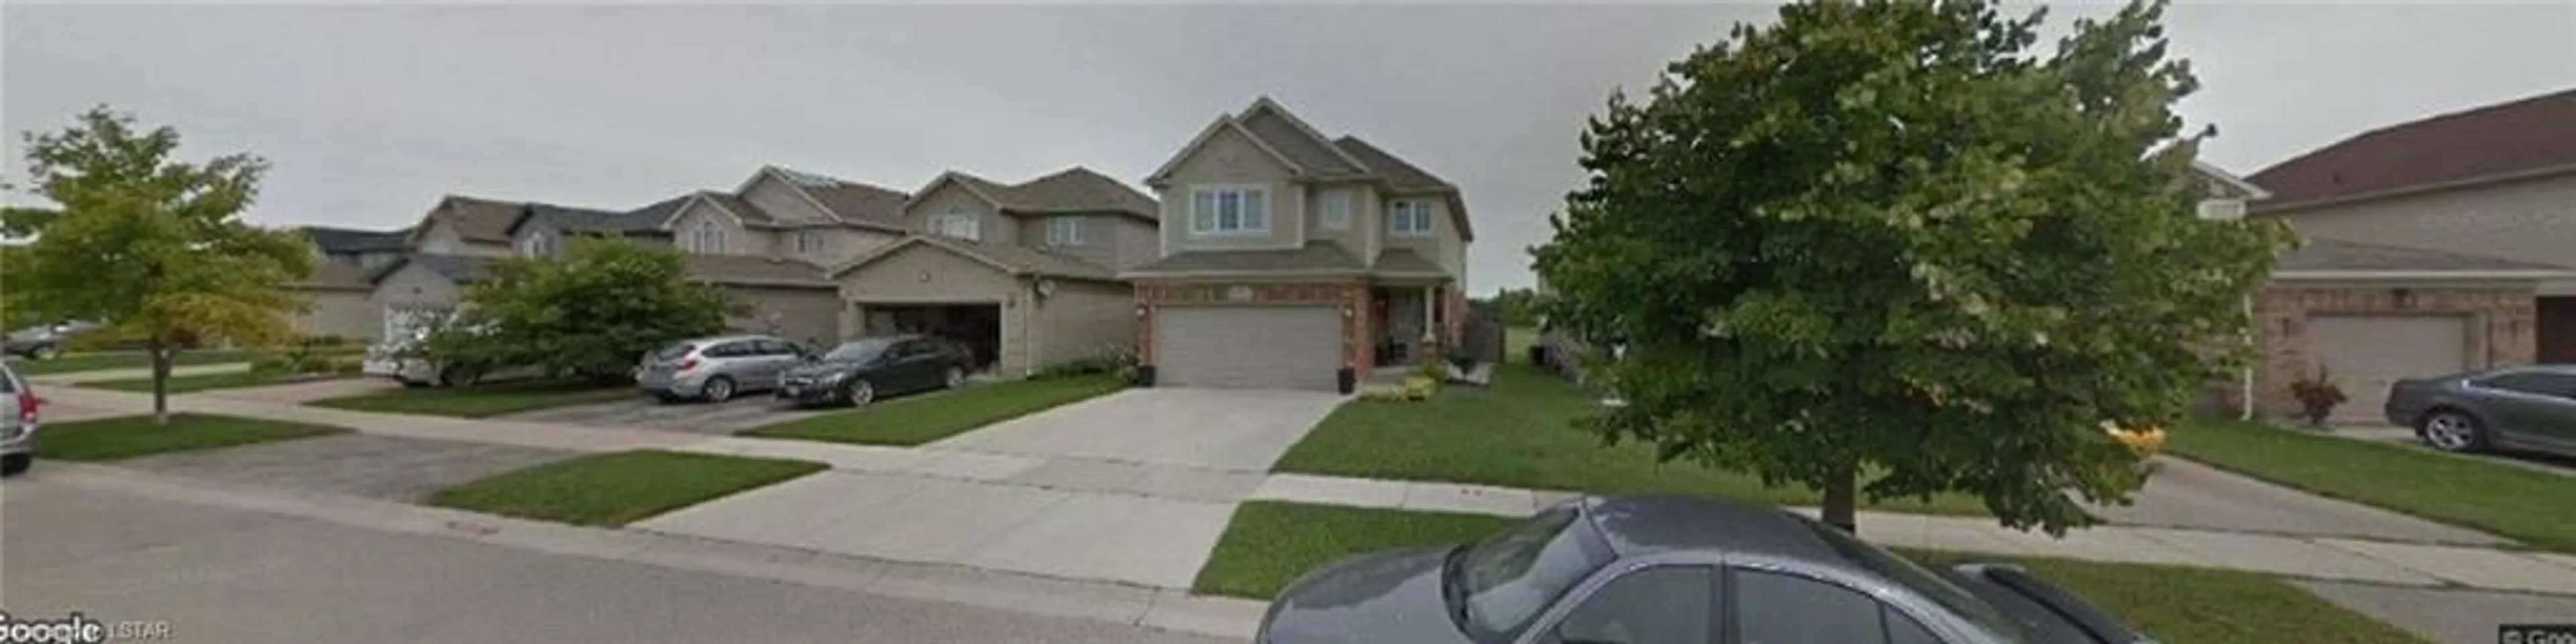 Street view for 2515 Meadowgate Blvd, London Ontario N6M 1L8